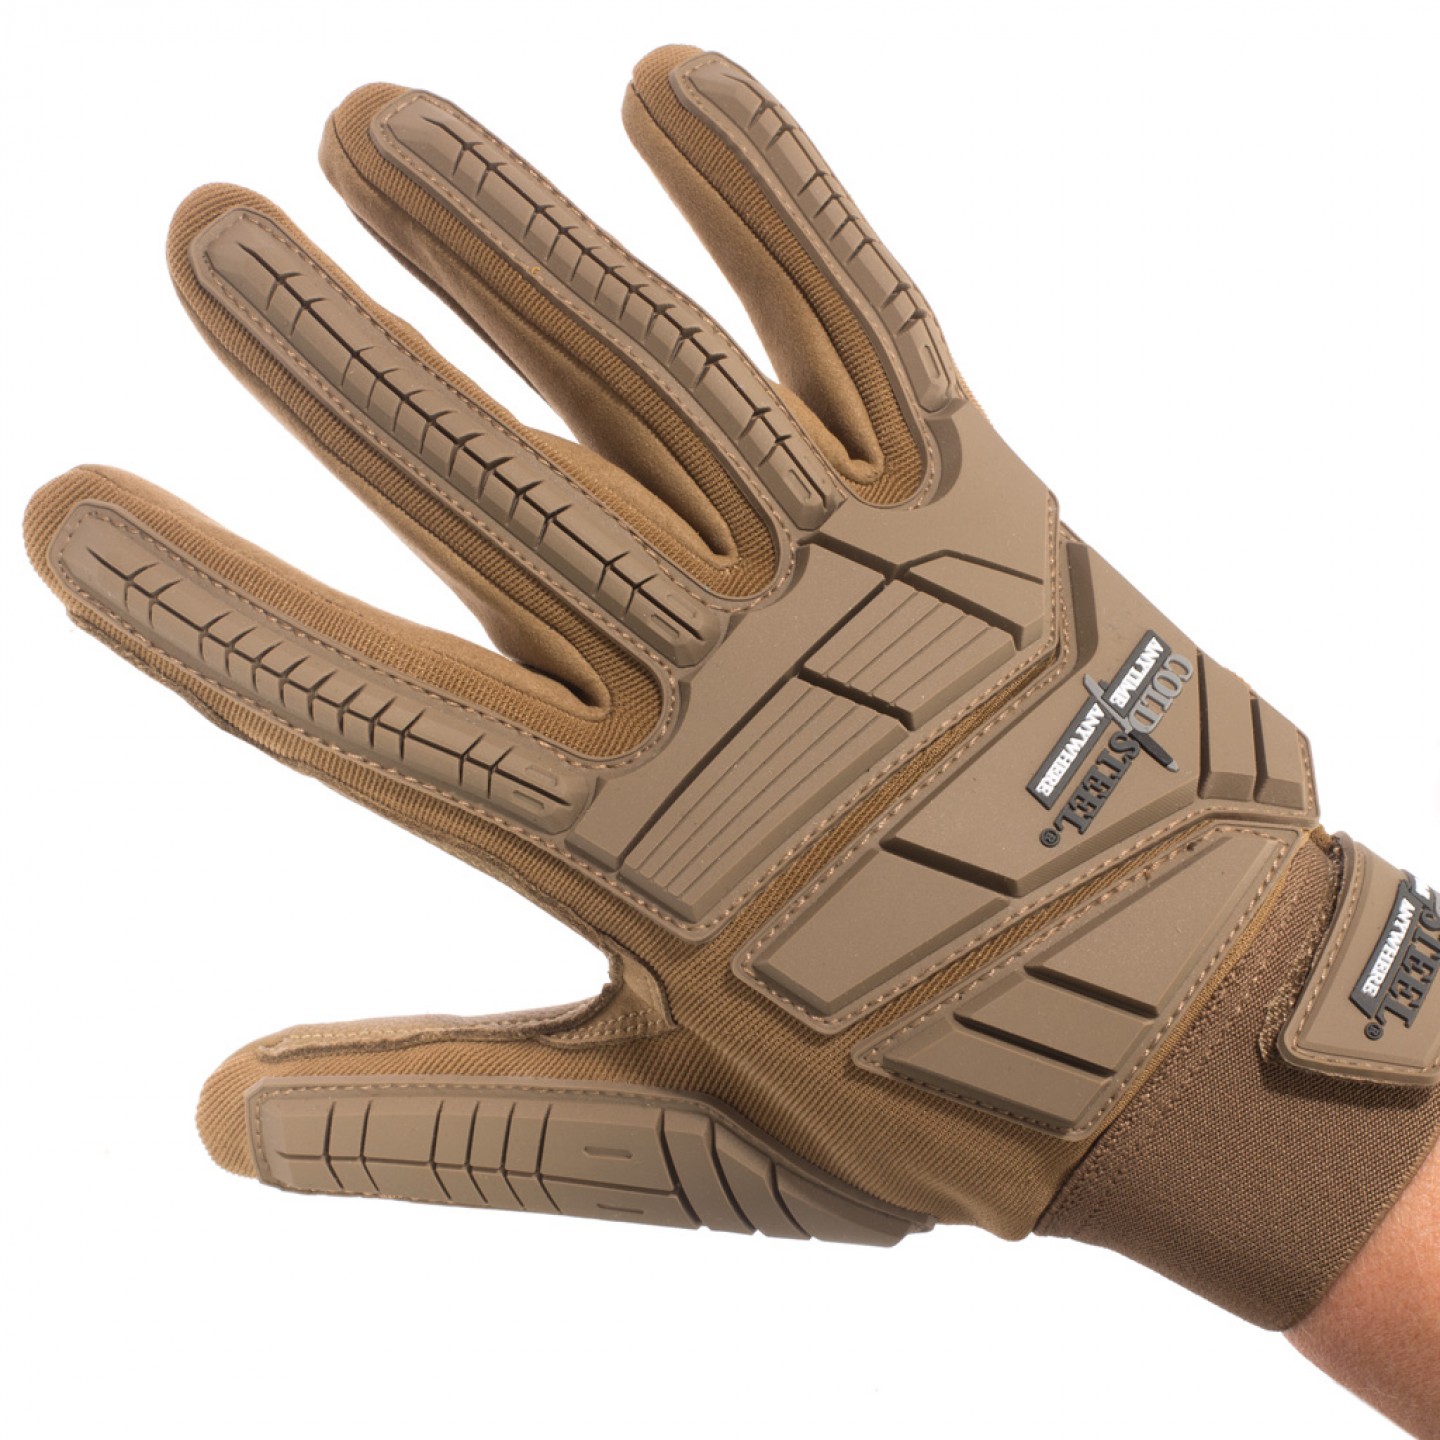 Gloves XL (Coyote Tan)